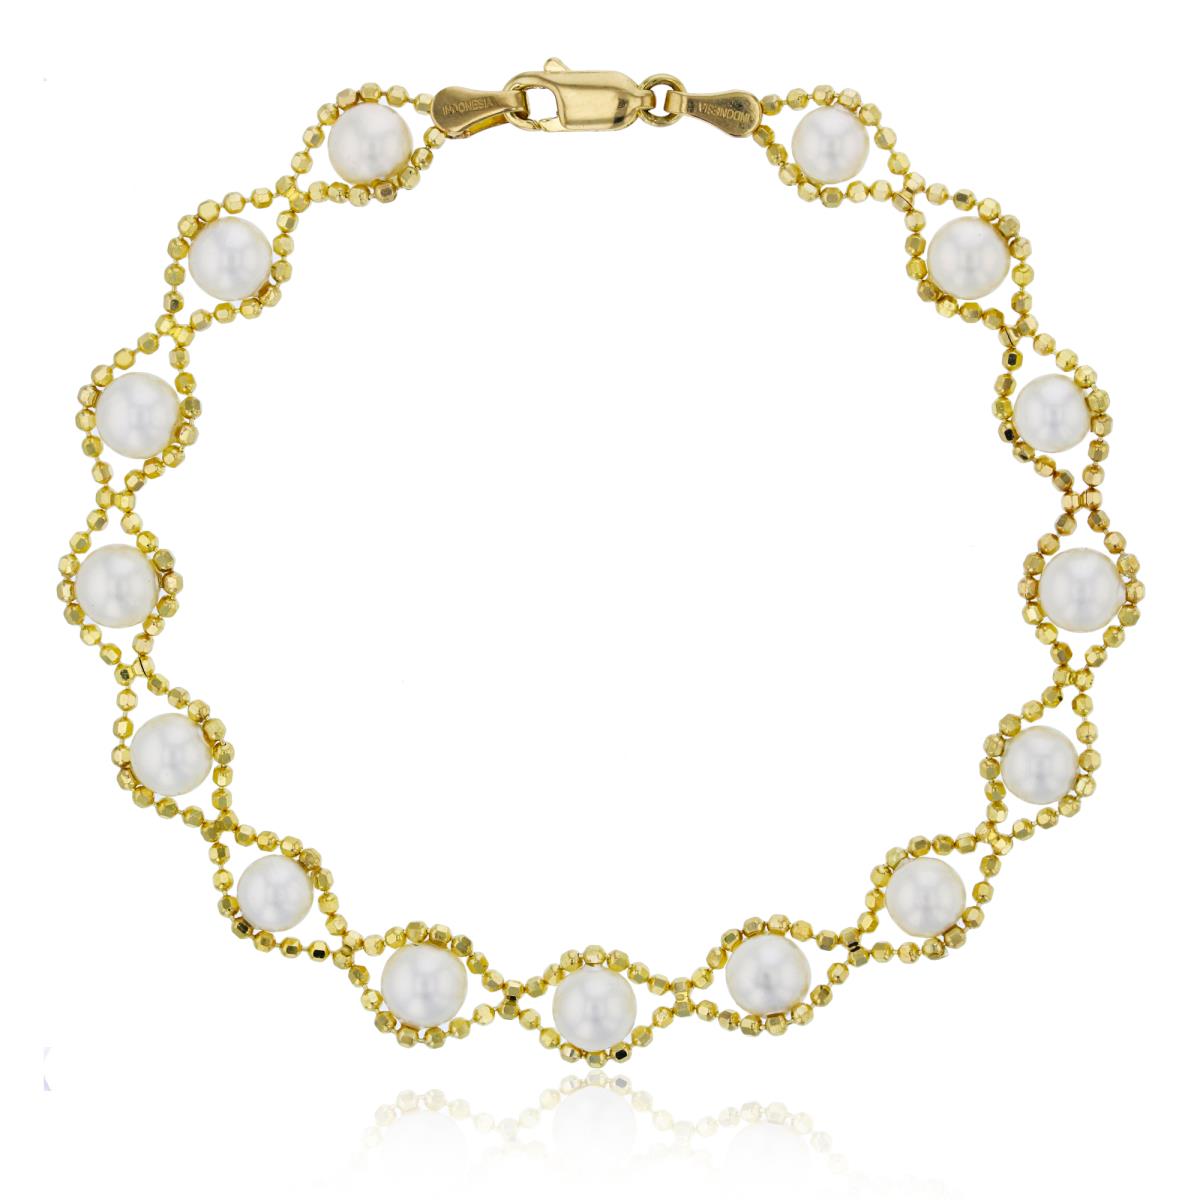 10K Yellow Gold 5mm White Pearl Chained Bracelet